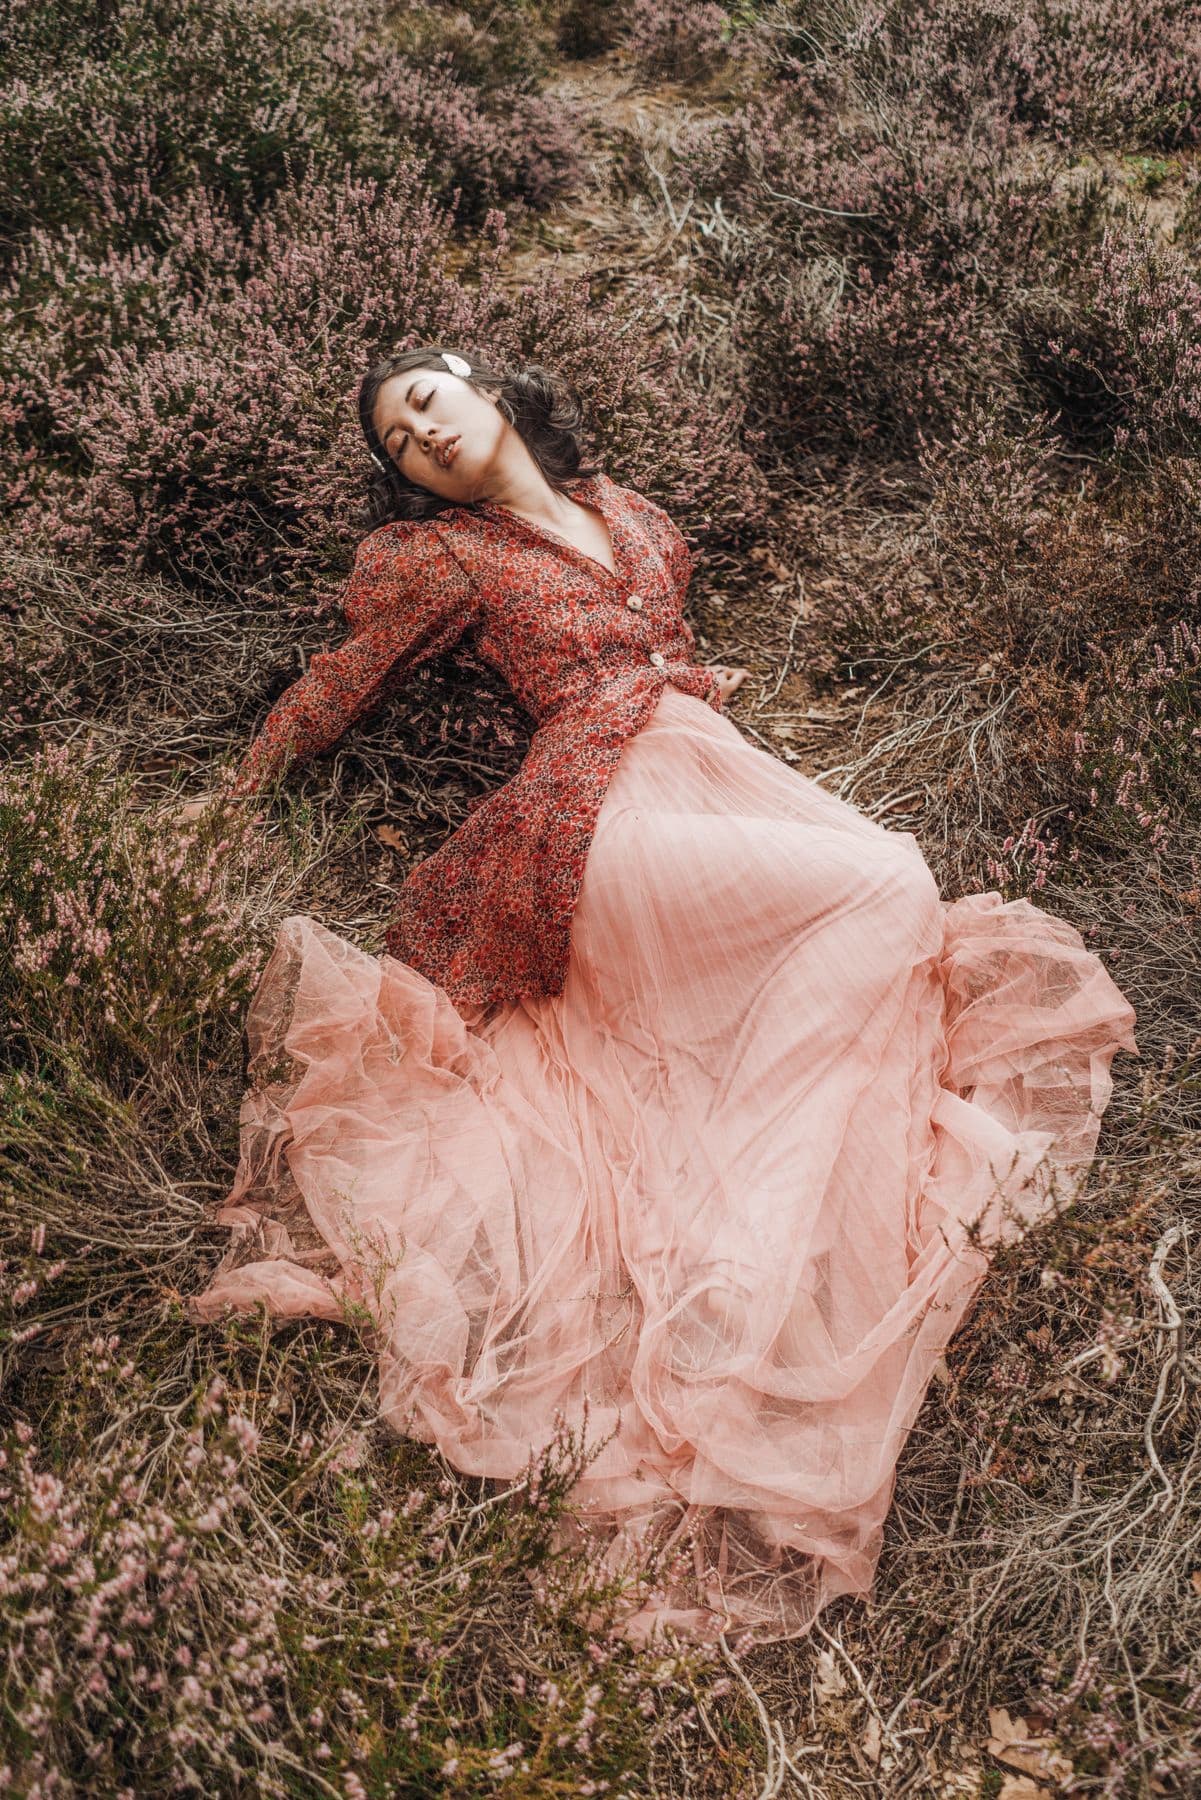 Female model lies among wildflowers in a pink skirt and a long blouse.